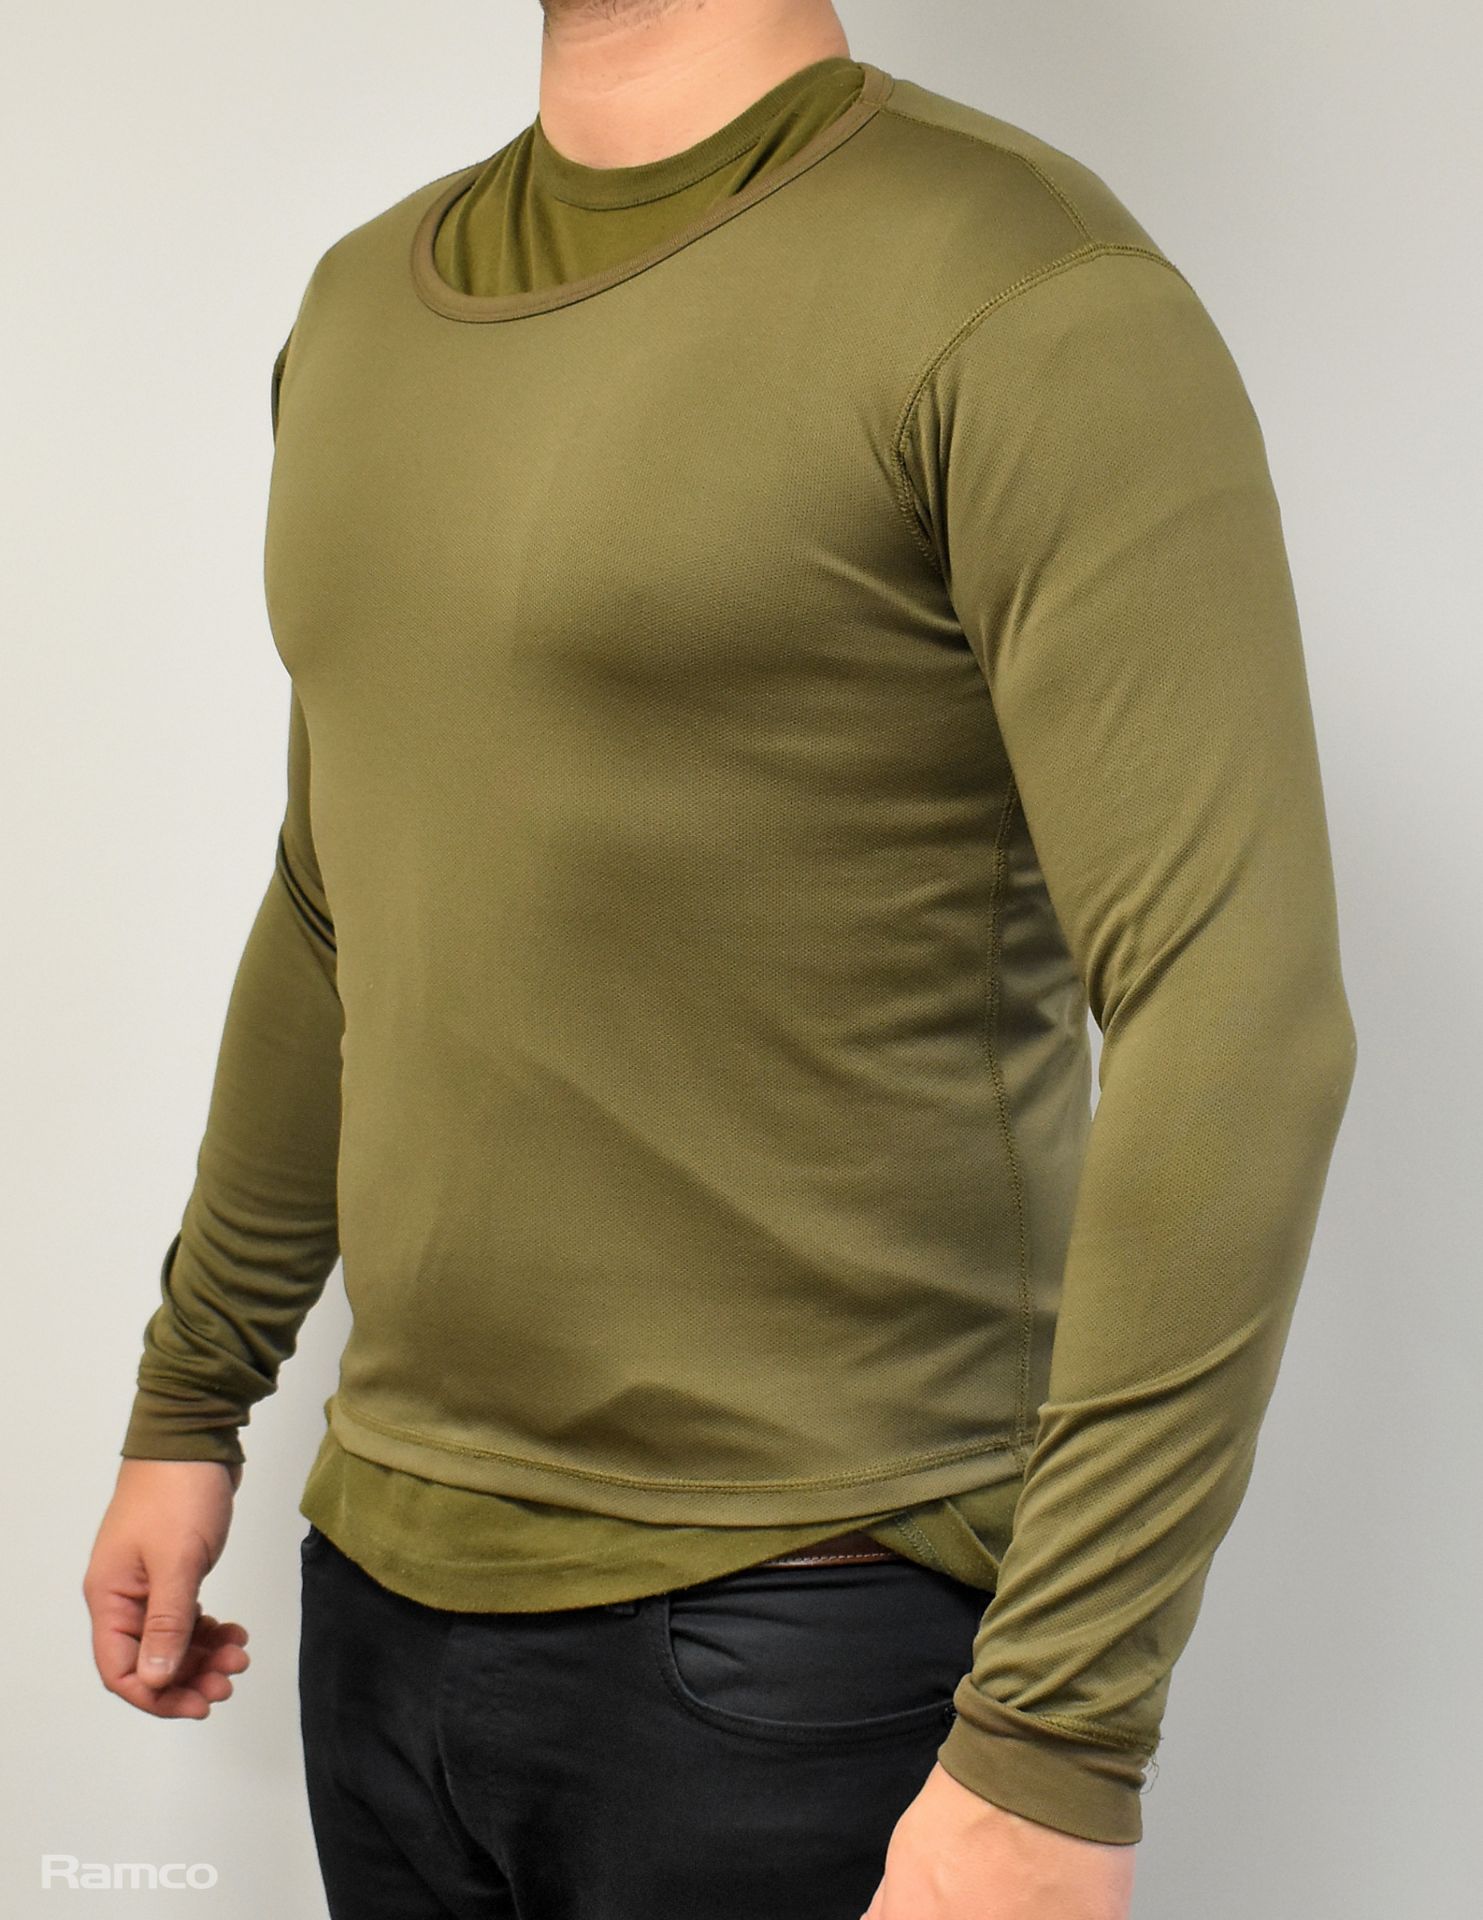 50x Thermal underwear long sleeved vests - mixed colours - mixed grades and sizes - Image 2 of 7